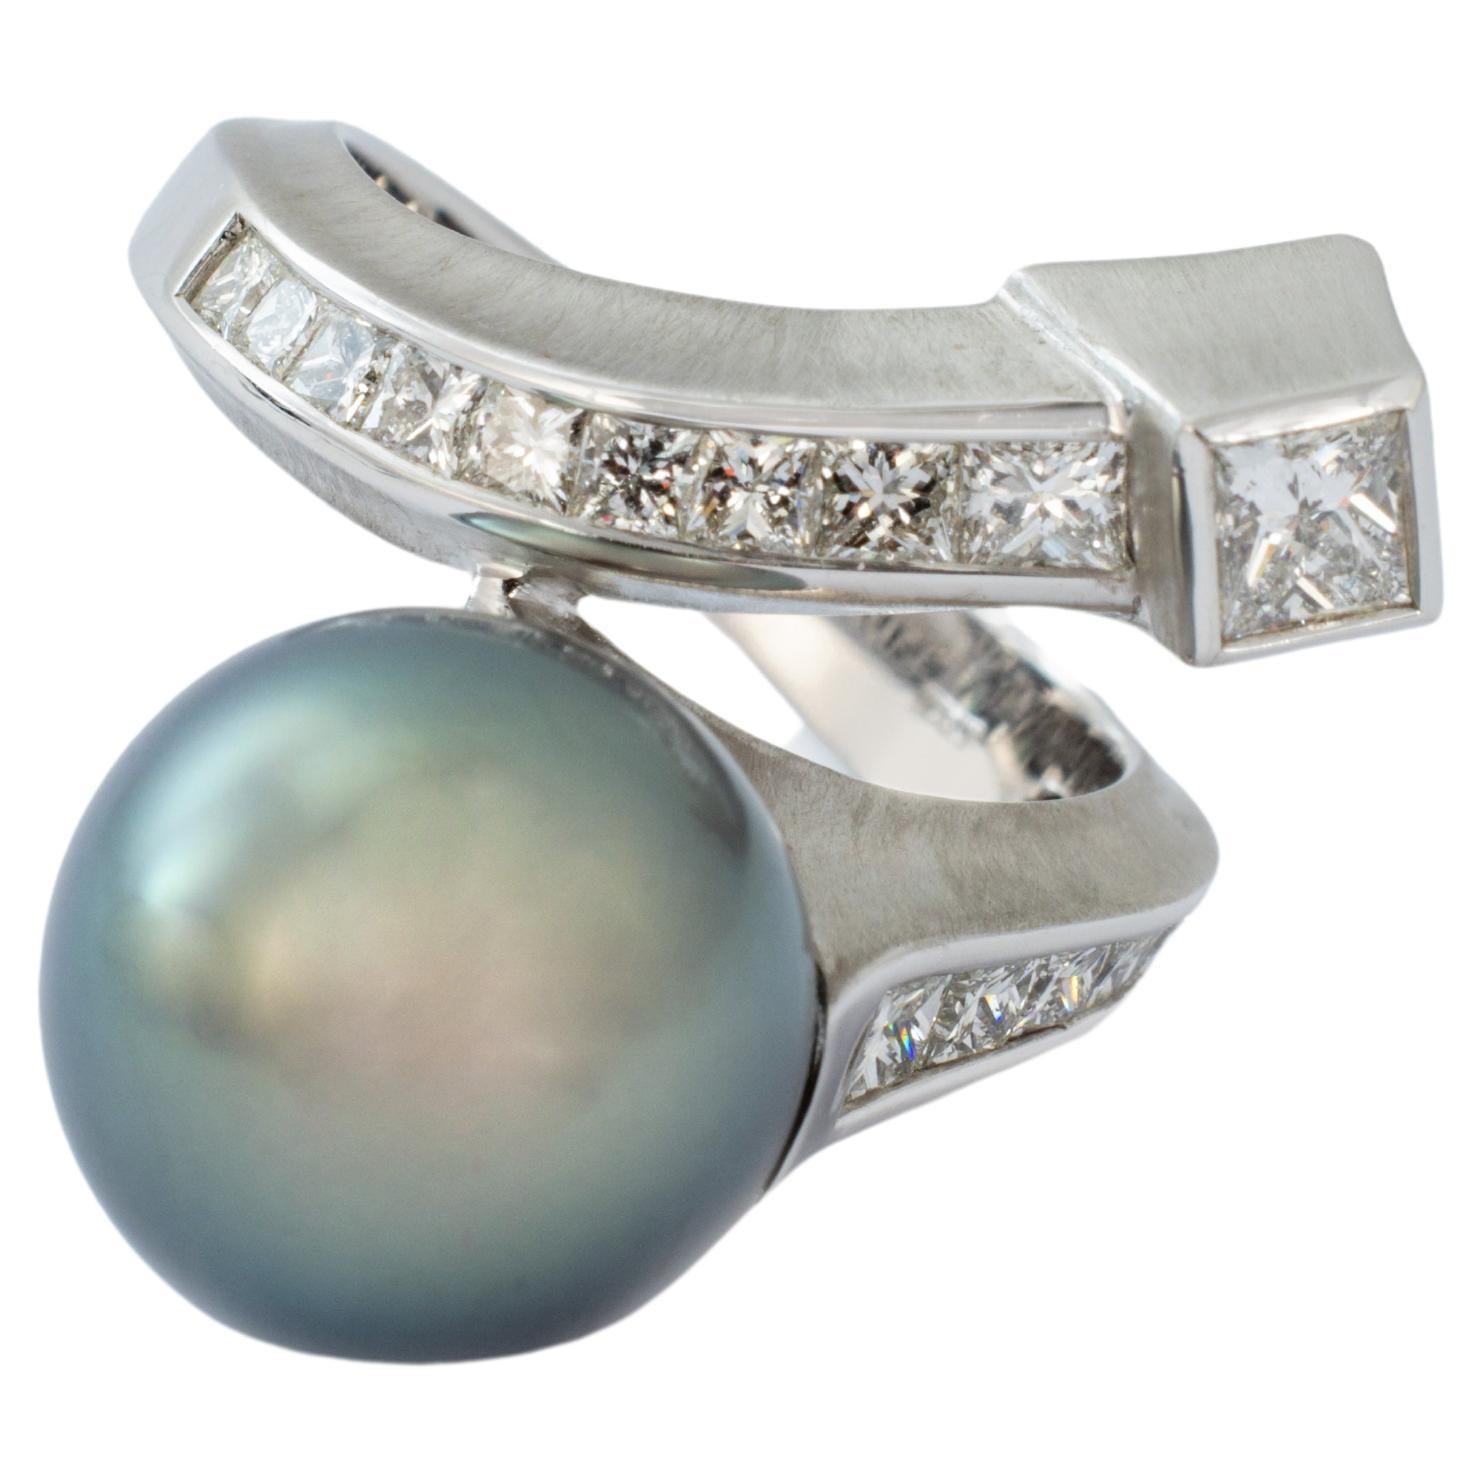 "Costis" Eiffel Ring, 3.43 gr Gray South Sea Pearl, and 1.43 cts Diamonds For Sale